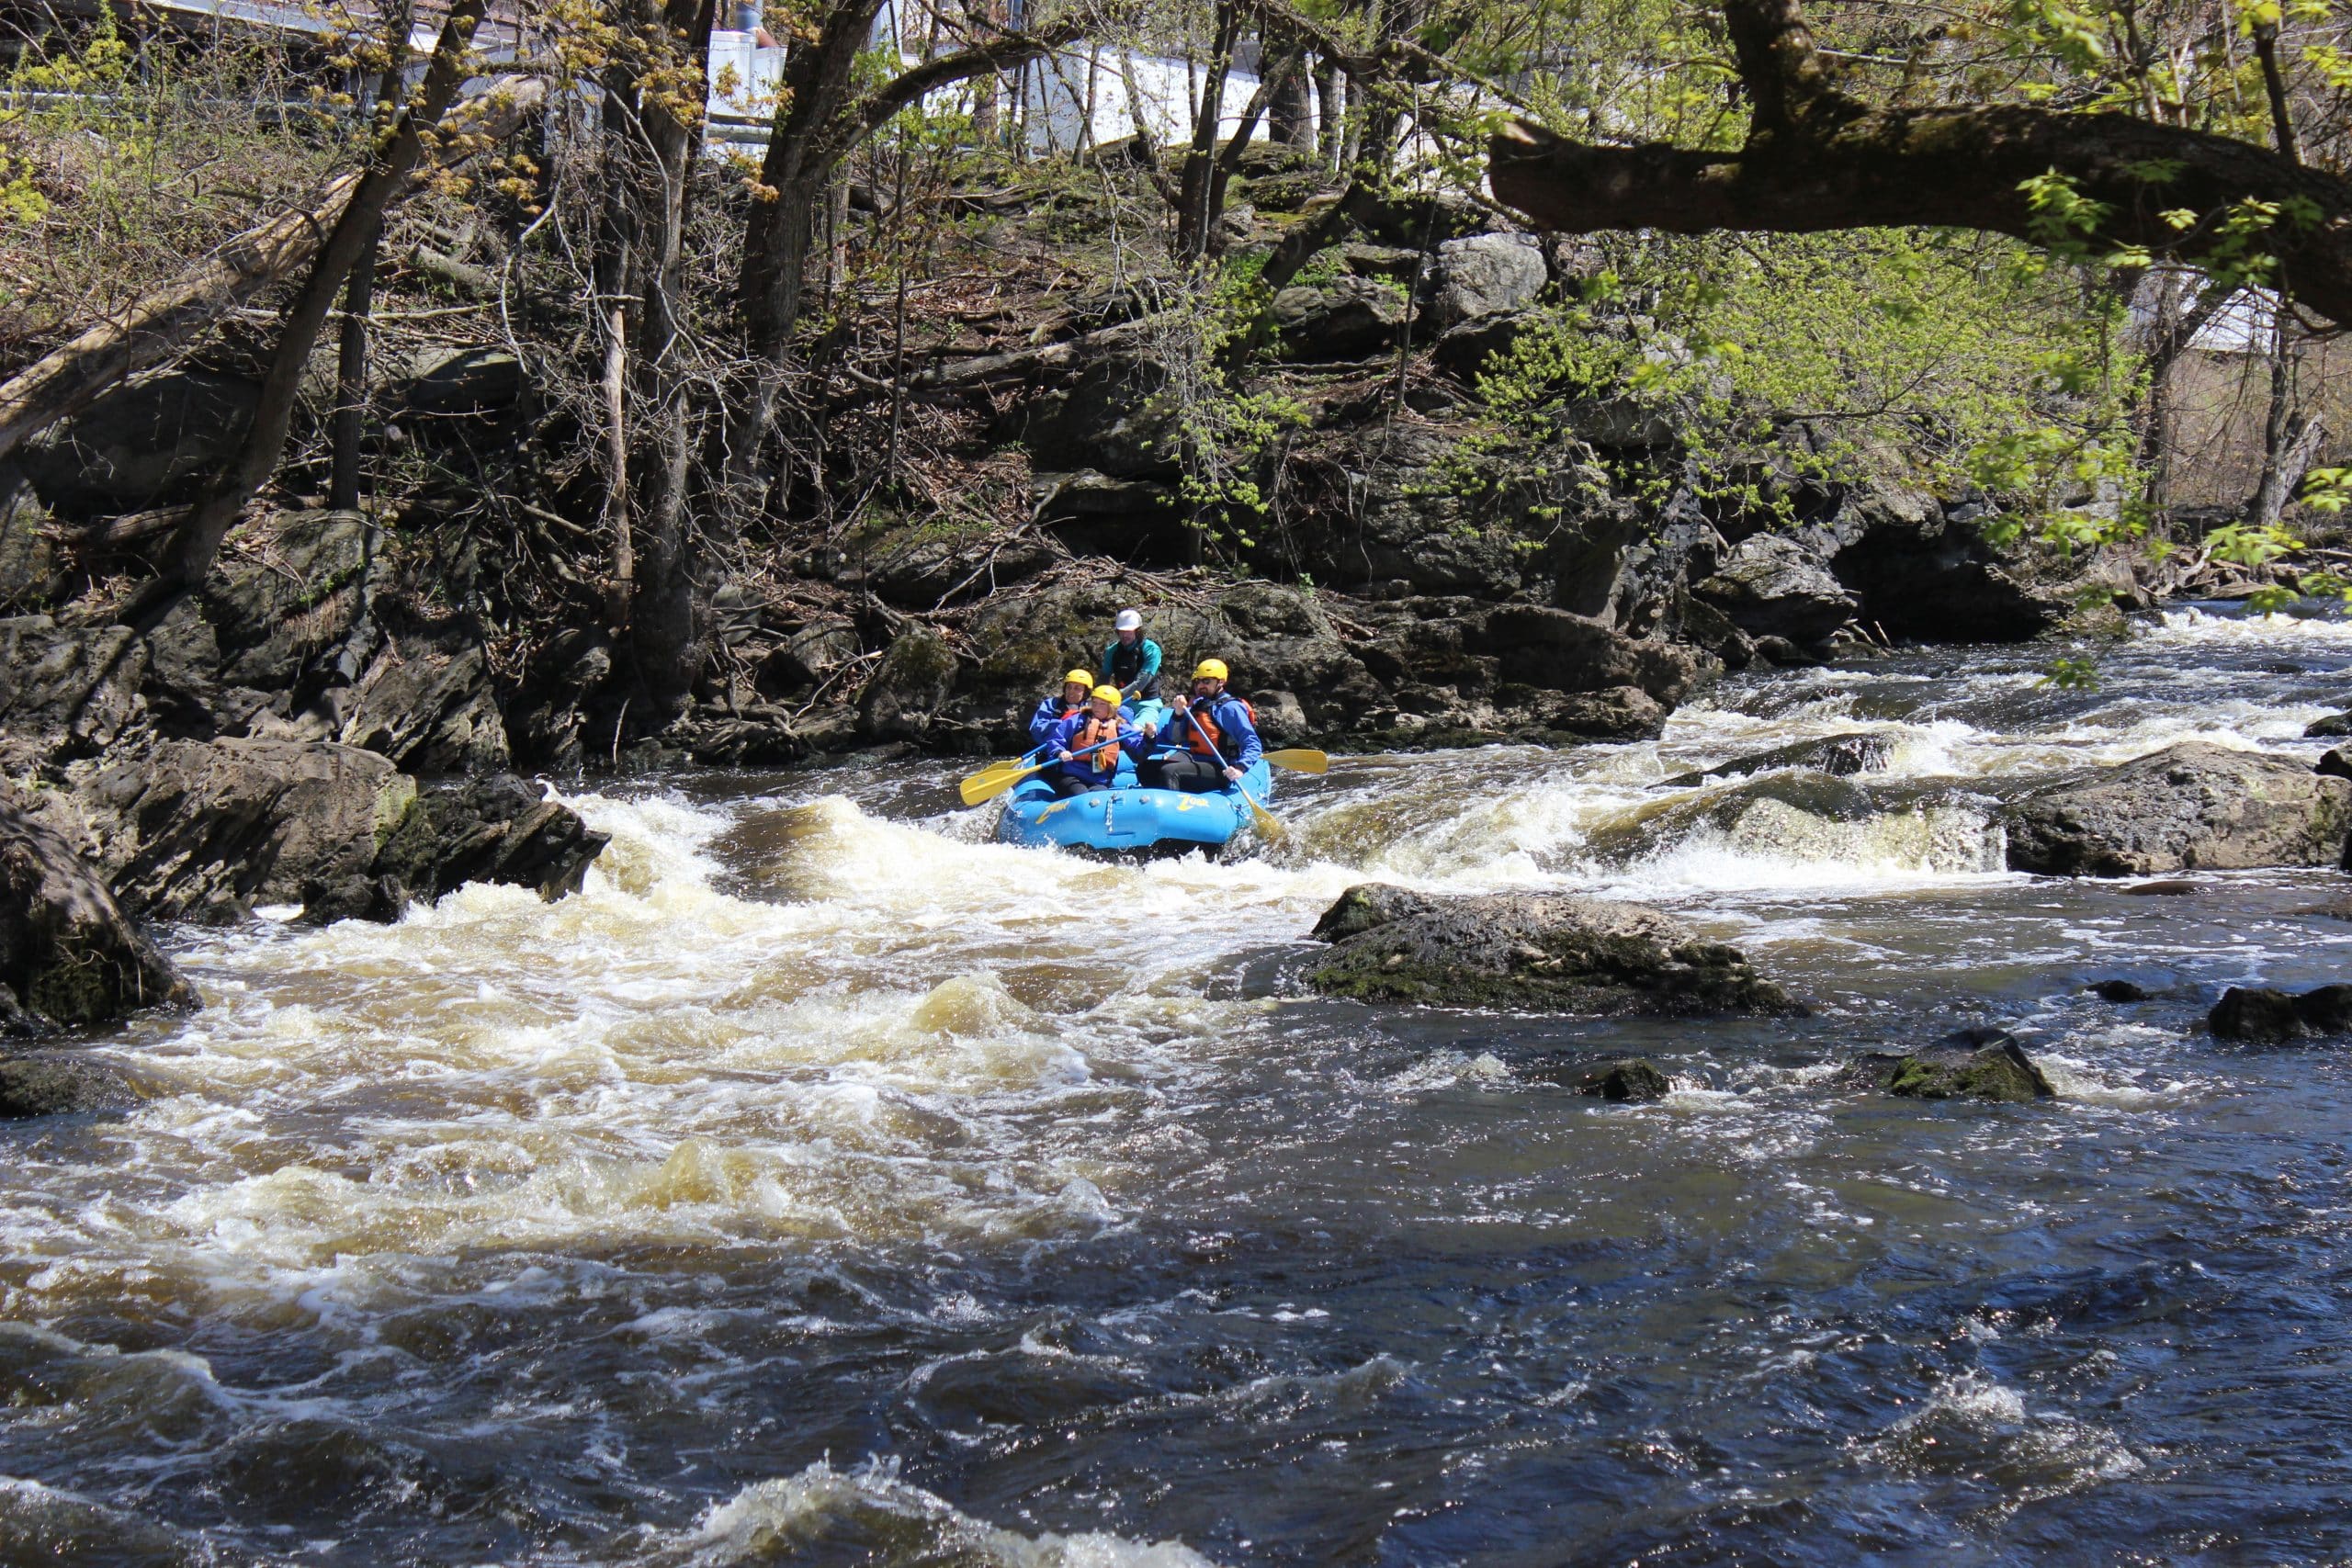 Rafters headed through a section of whitewater on a Zoar Outdoor trip